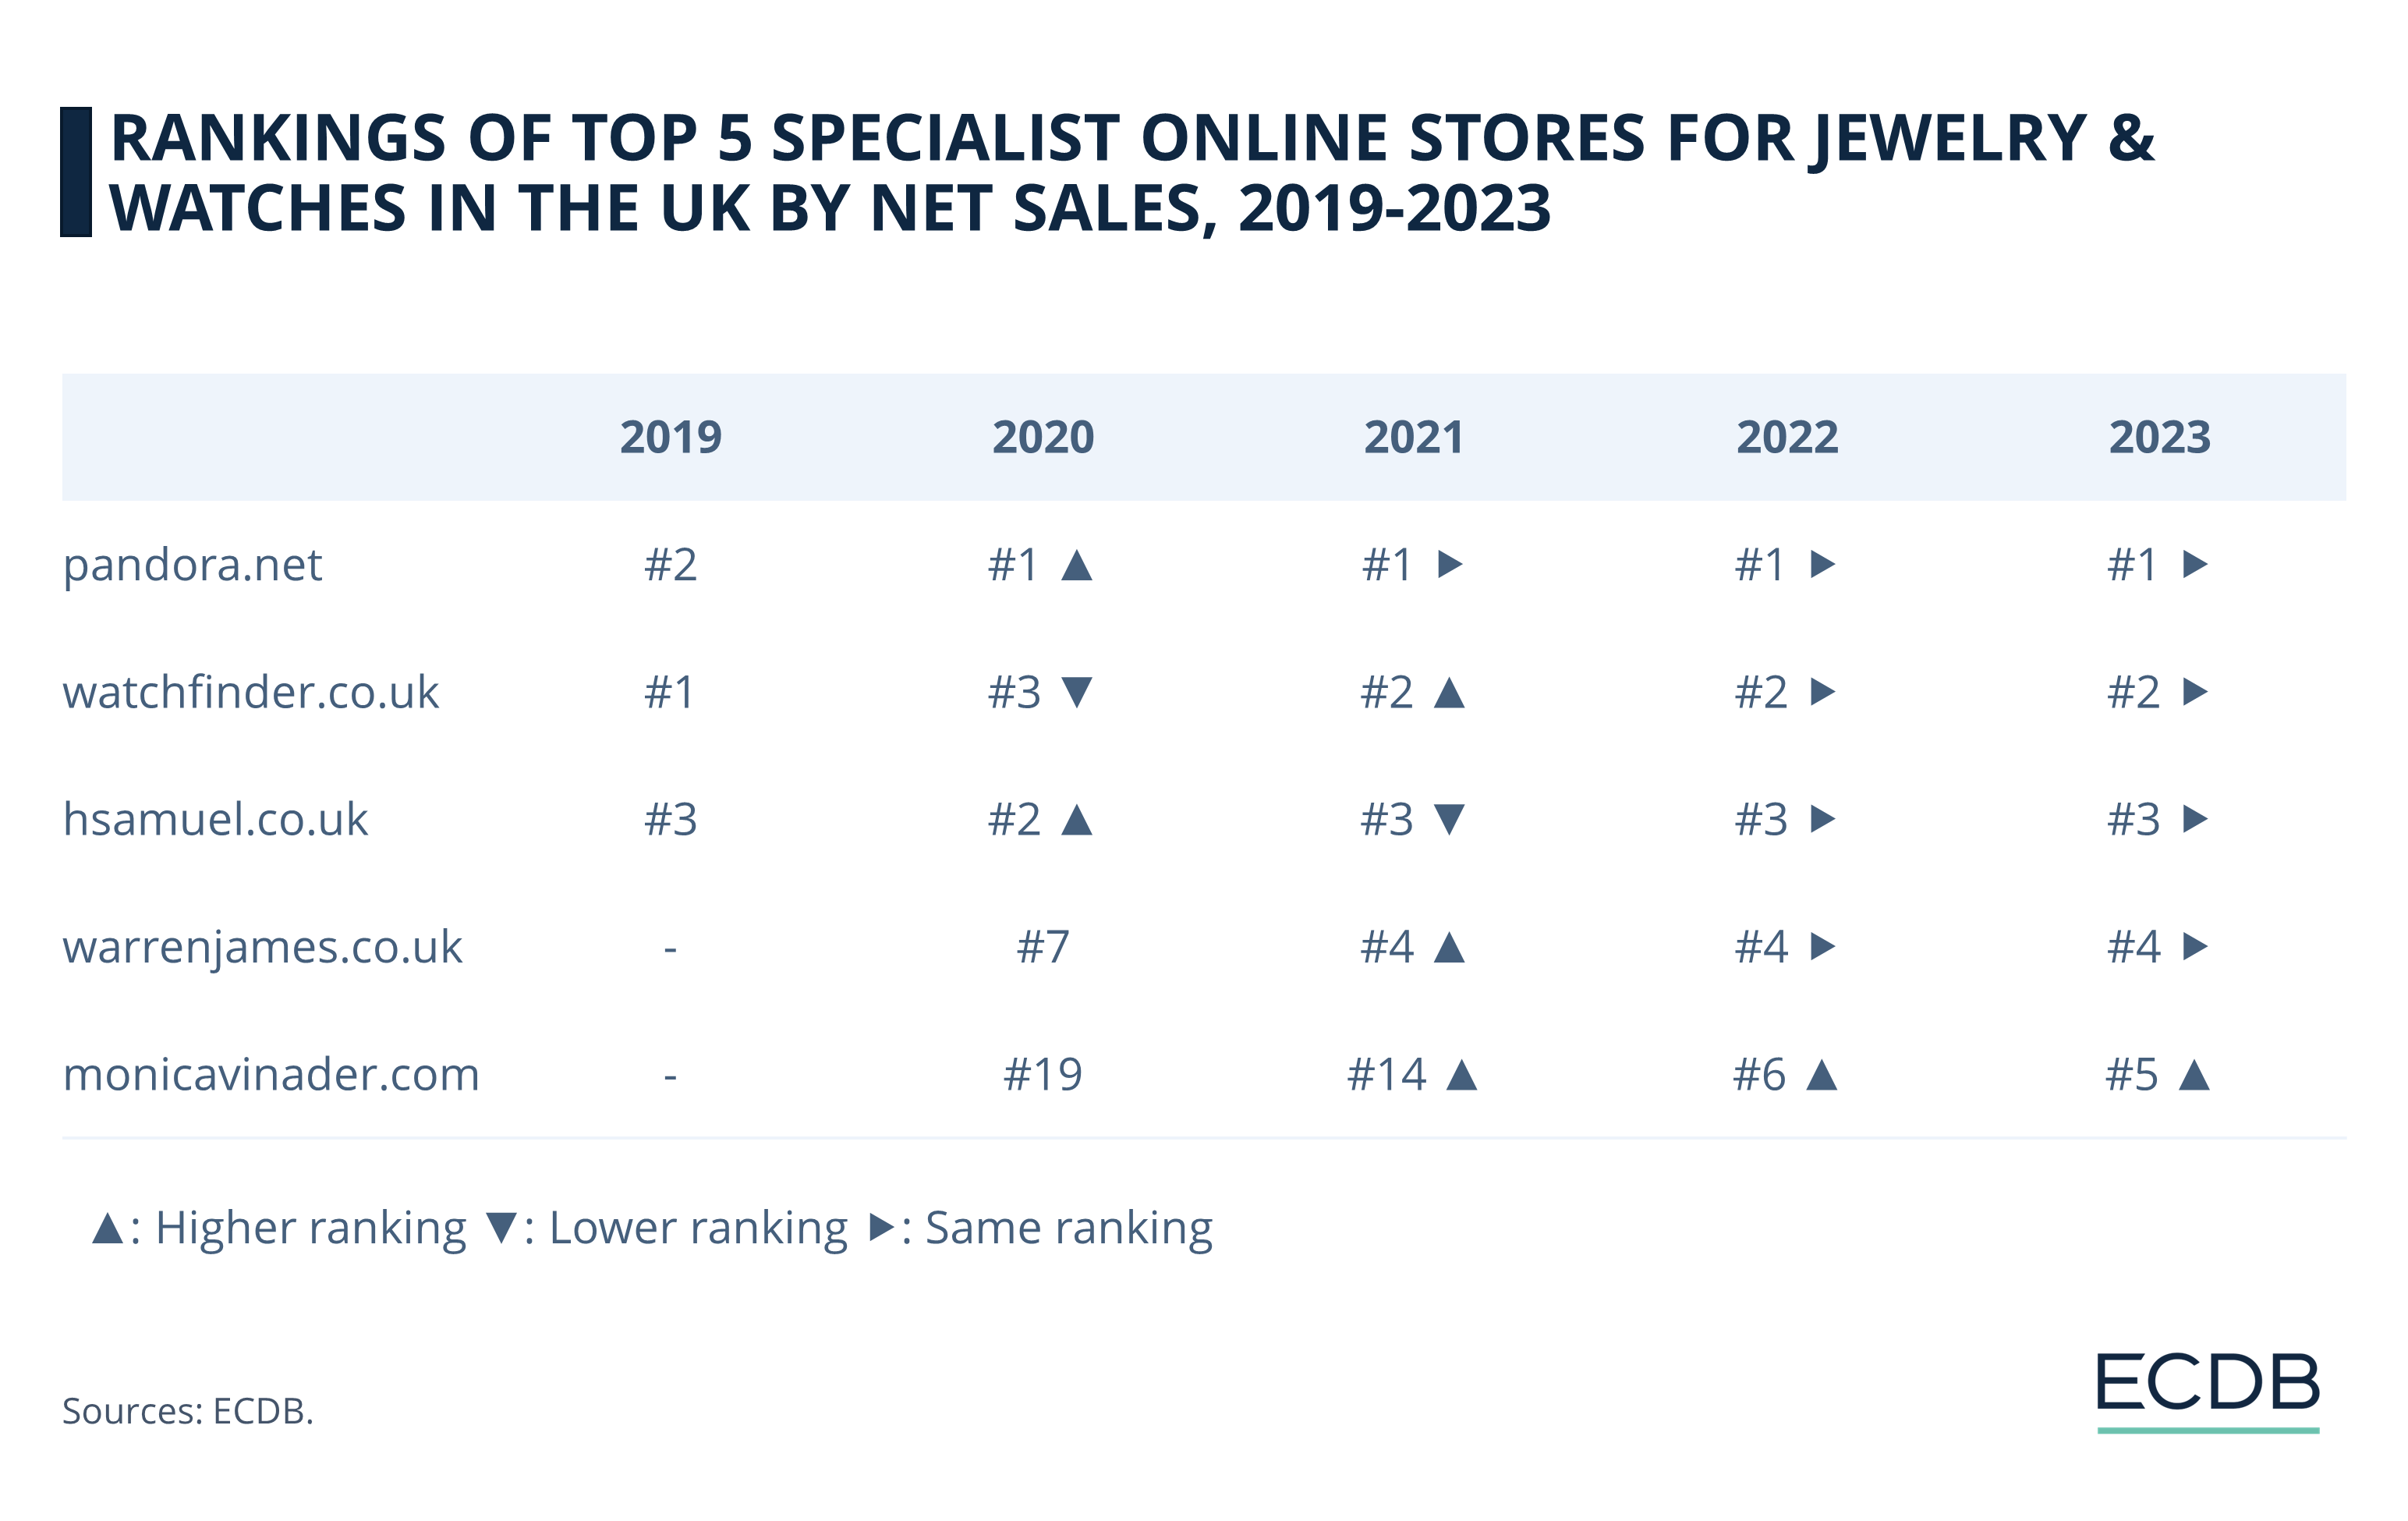 Rankings of Top 5 Specialist Online Stores for Jewelry & Watches in the UK by Net Sales, 2019-2023